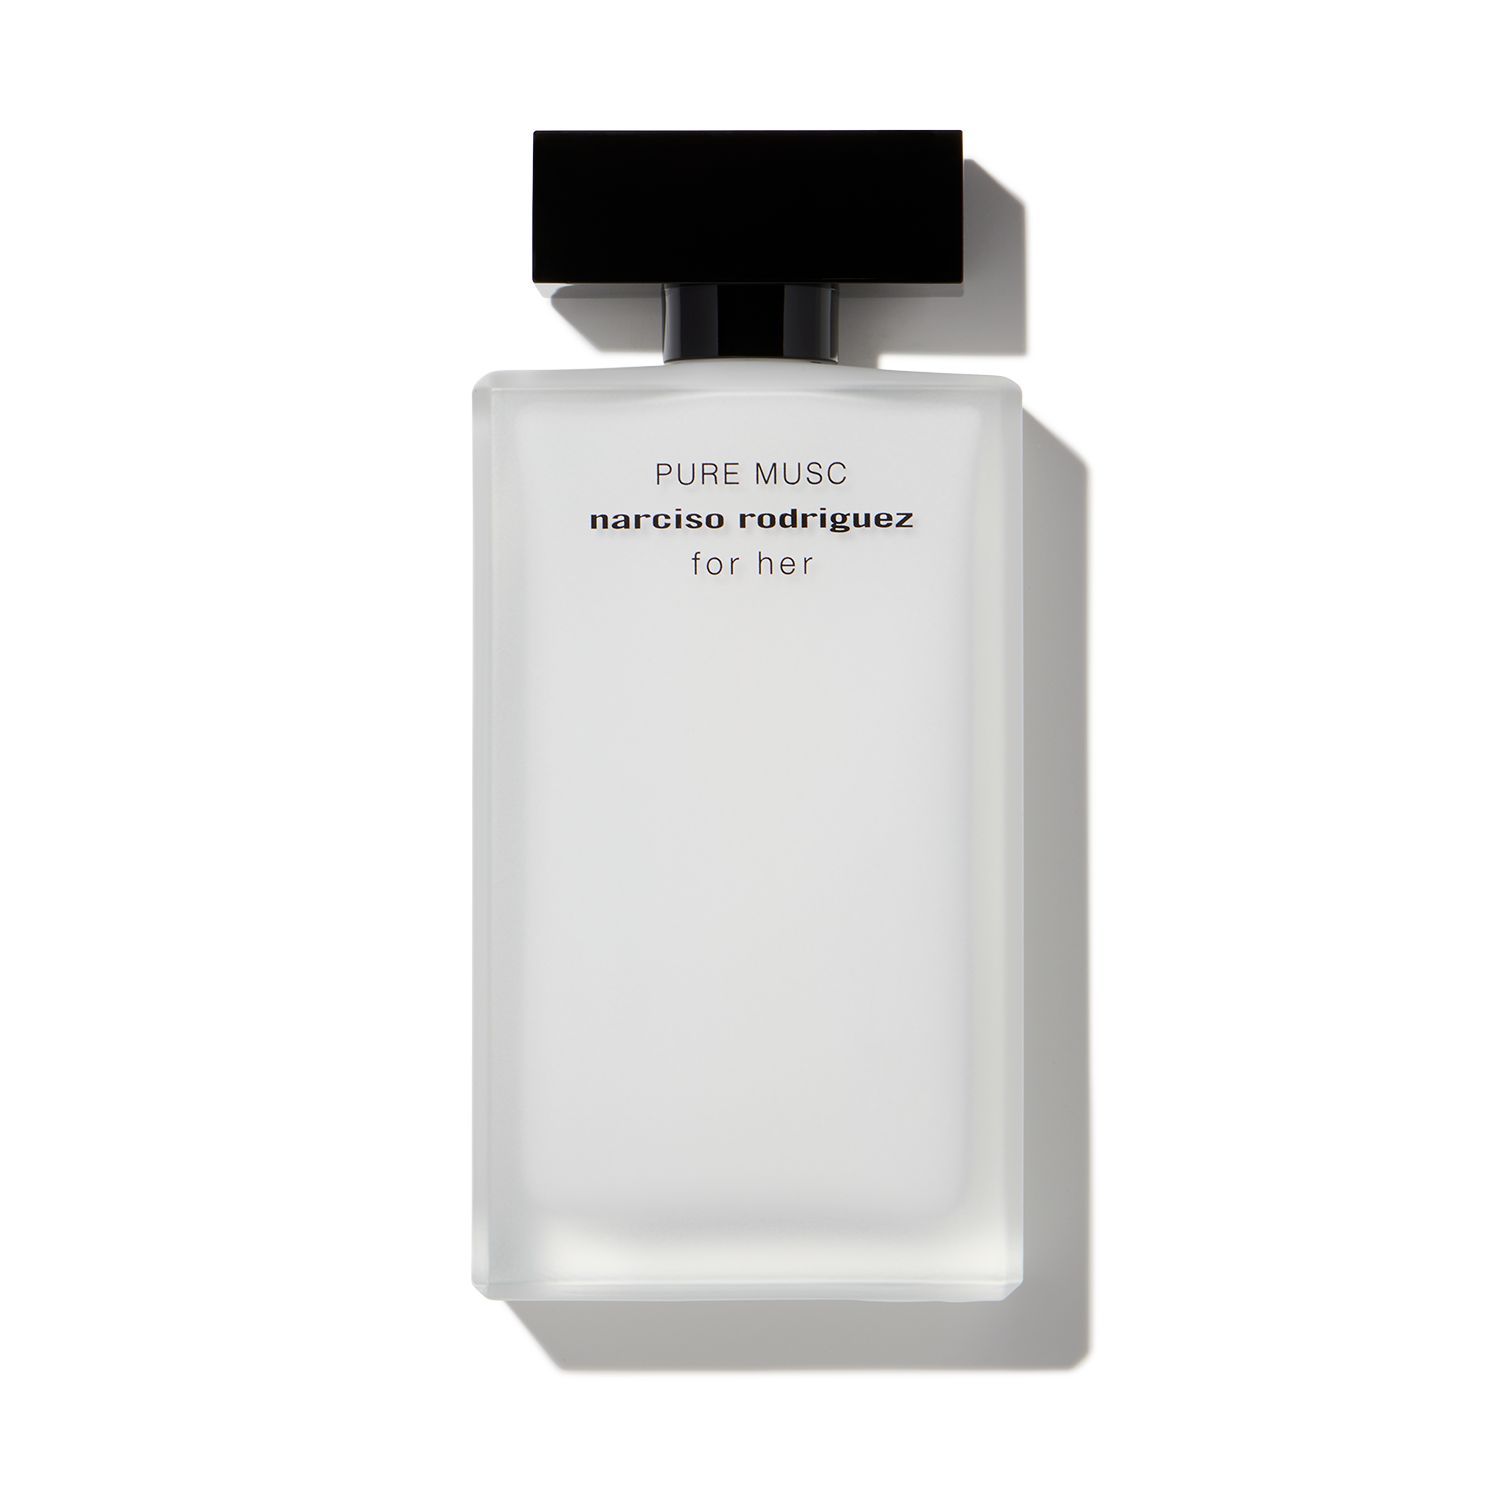 Pure Musc Absolu For Her Narciso Rodriguez perfume - a fragrance